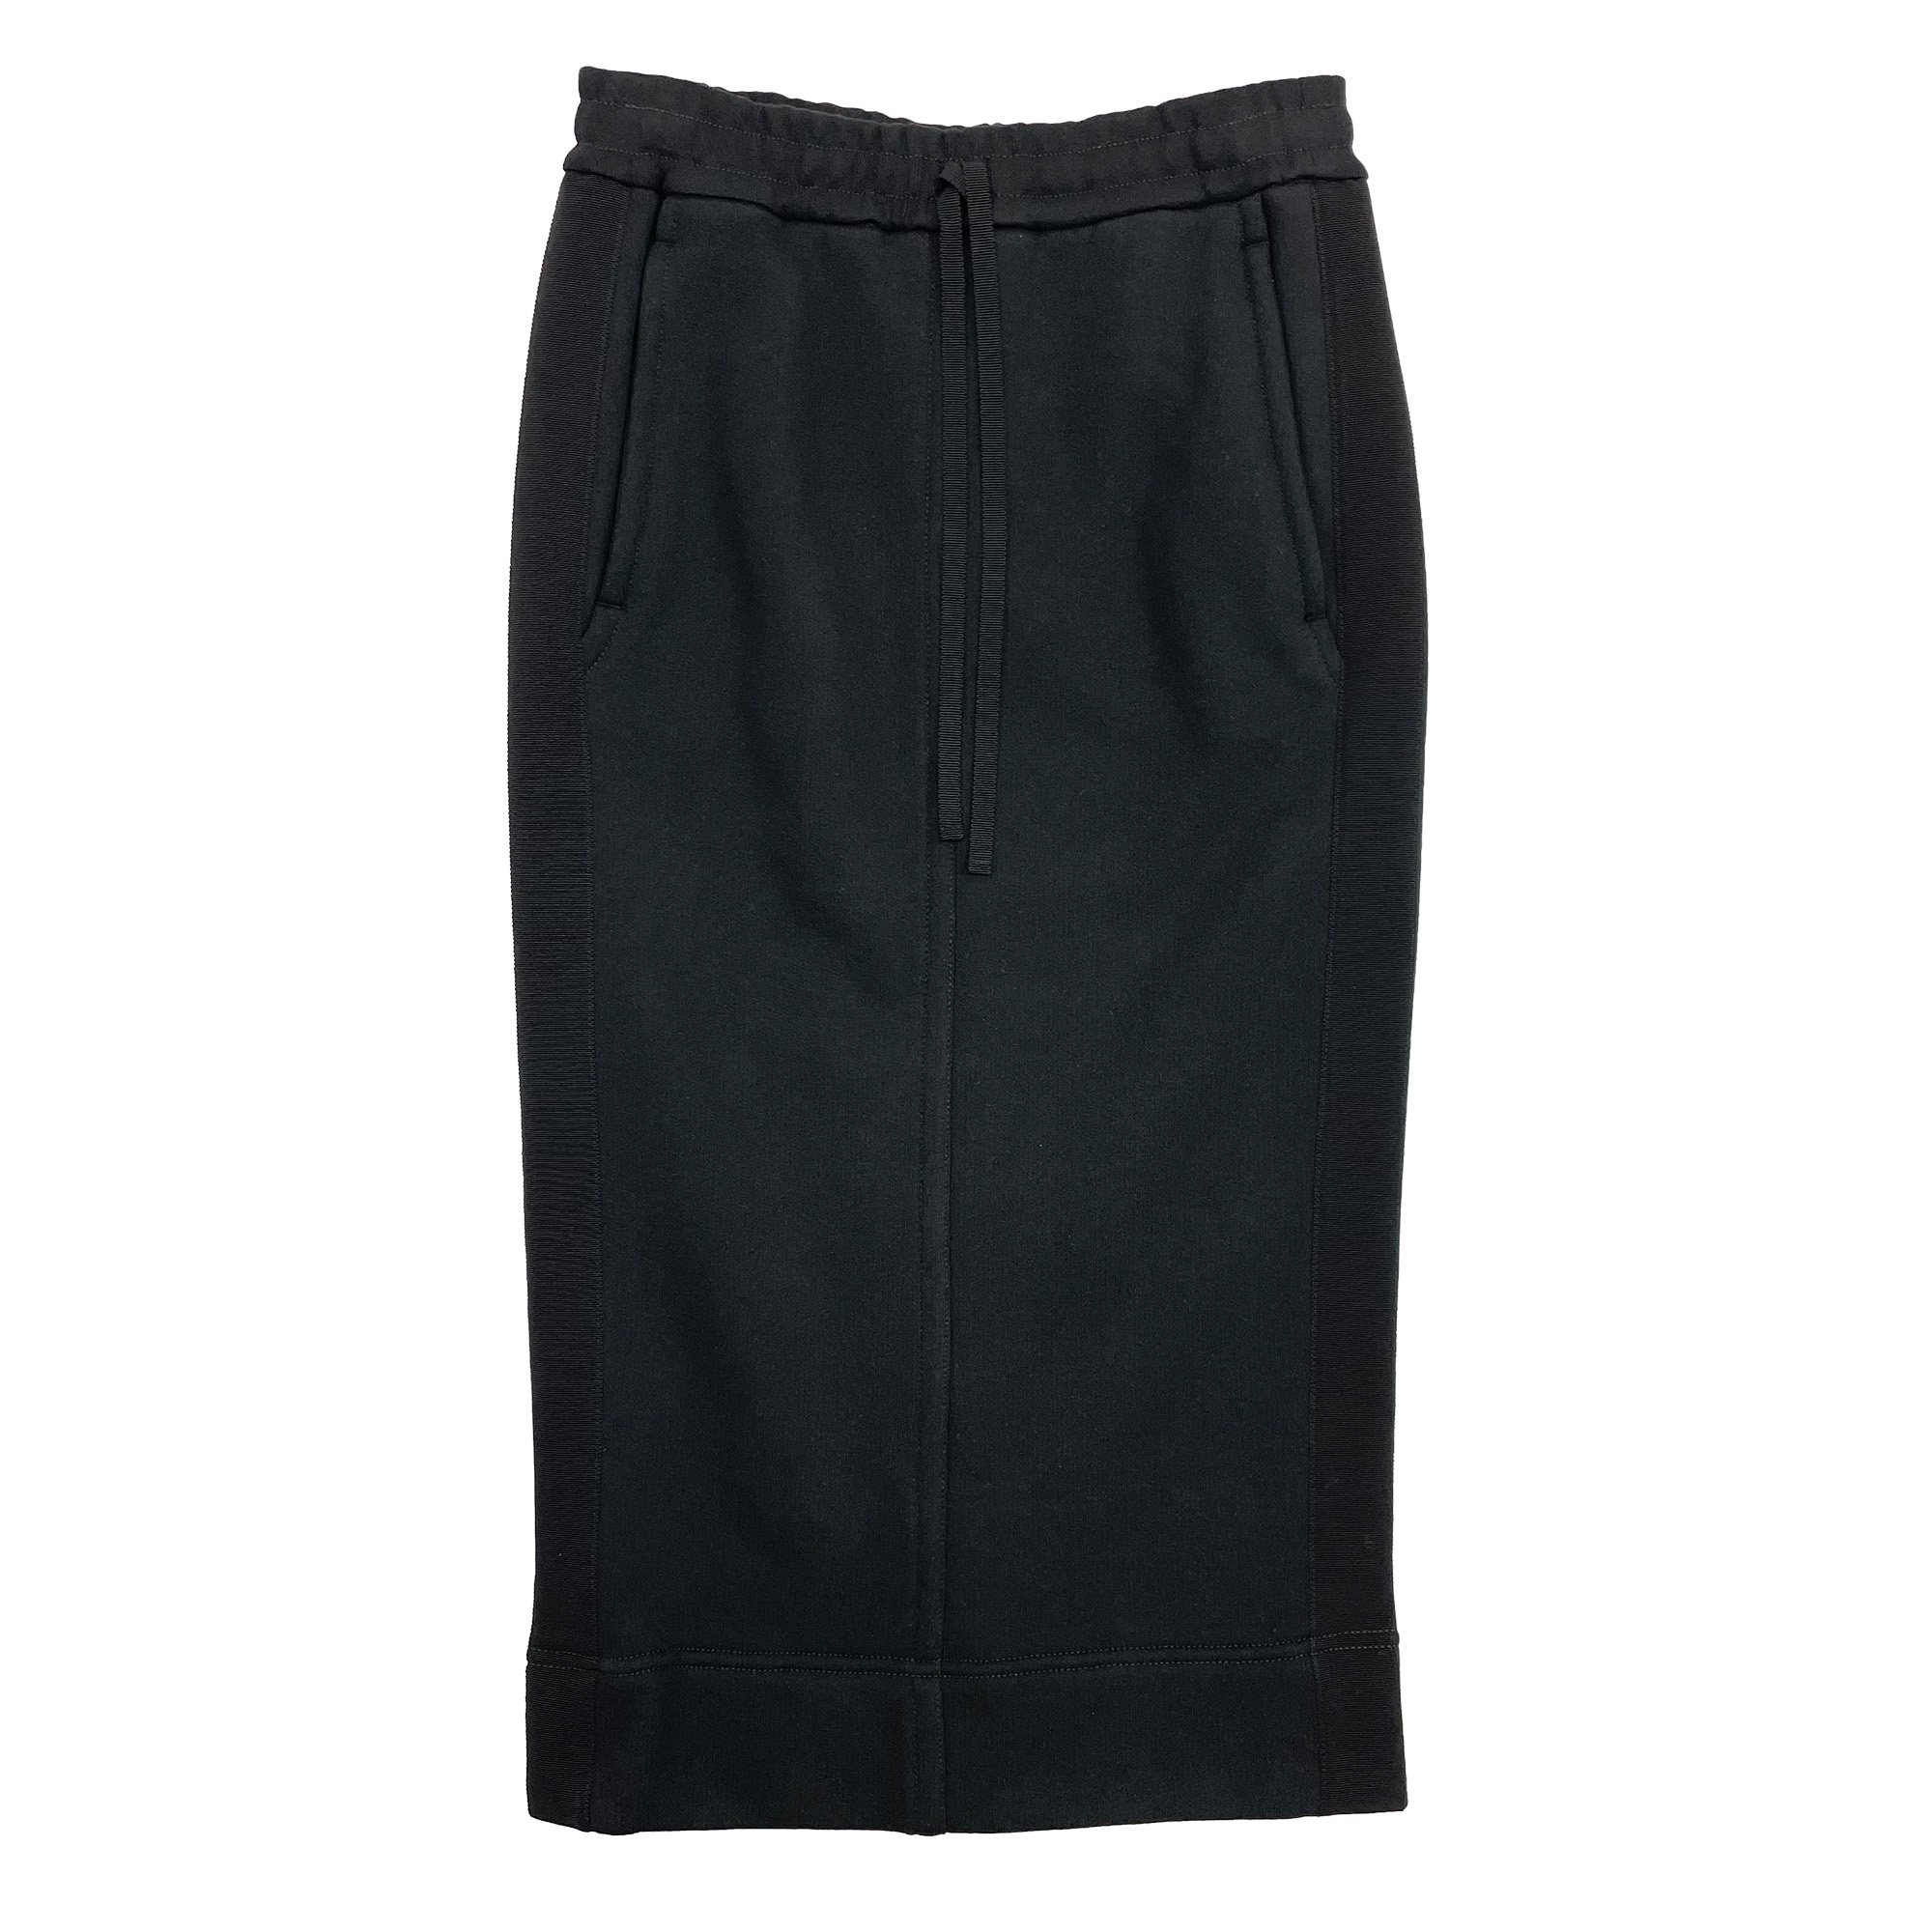 <img class='new_mark_img1' src='https://img.shop-pro.jp/img/new/icons7.gif' style='border:none;display:inline;margin:0px;padding:0px;width:auto;' />N21 SWEAT SKIRT